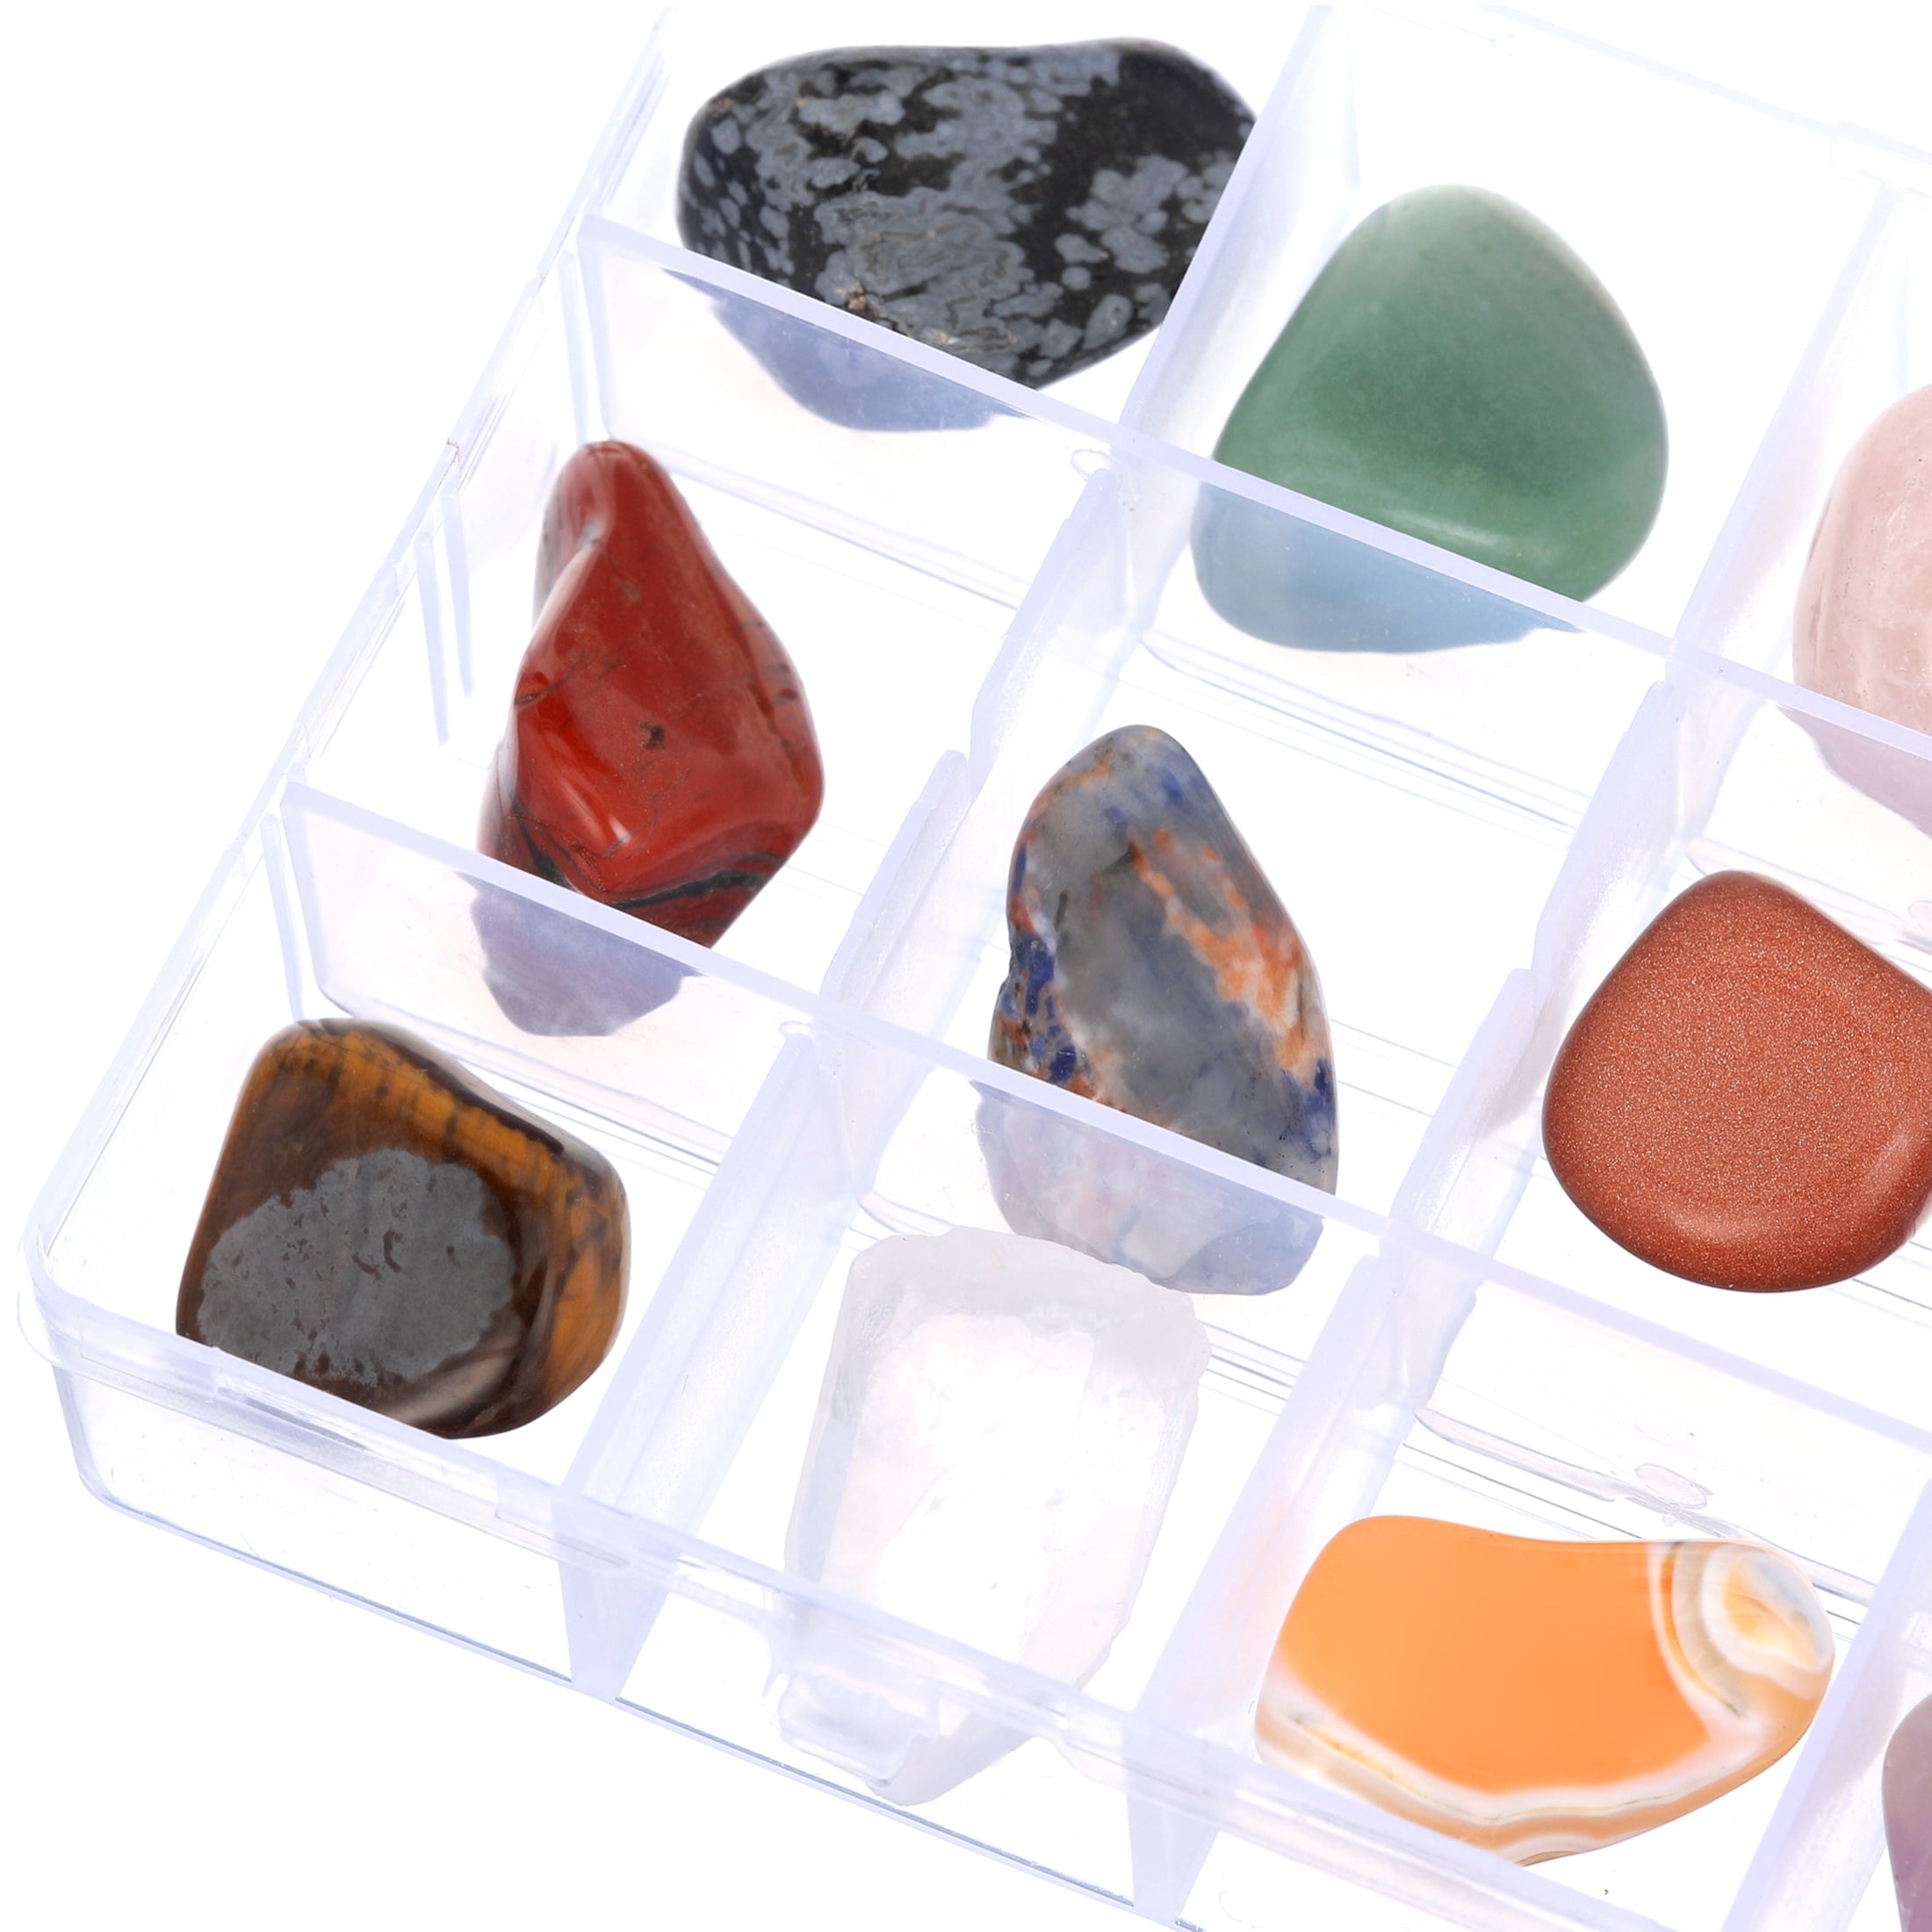 15 Piece Rock & Mineral Collection & Display Box – Dancing Bear's Rocks and  Minerals